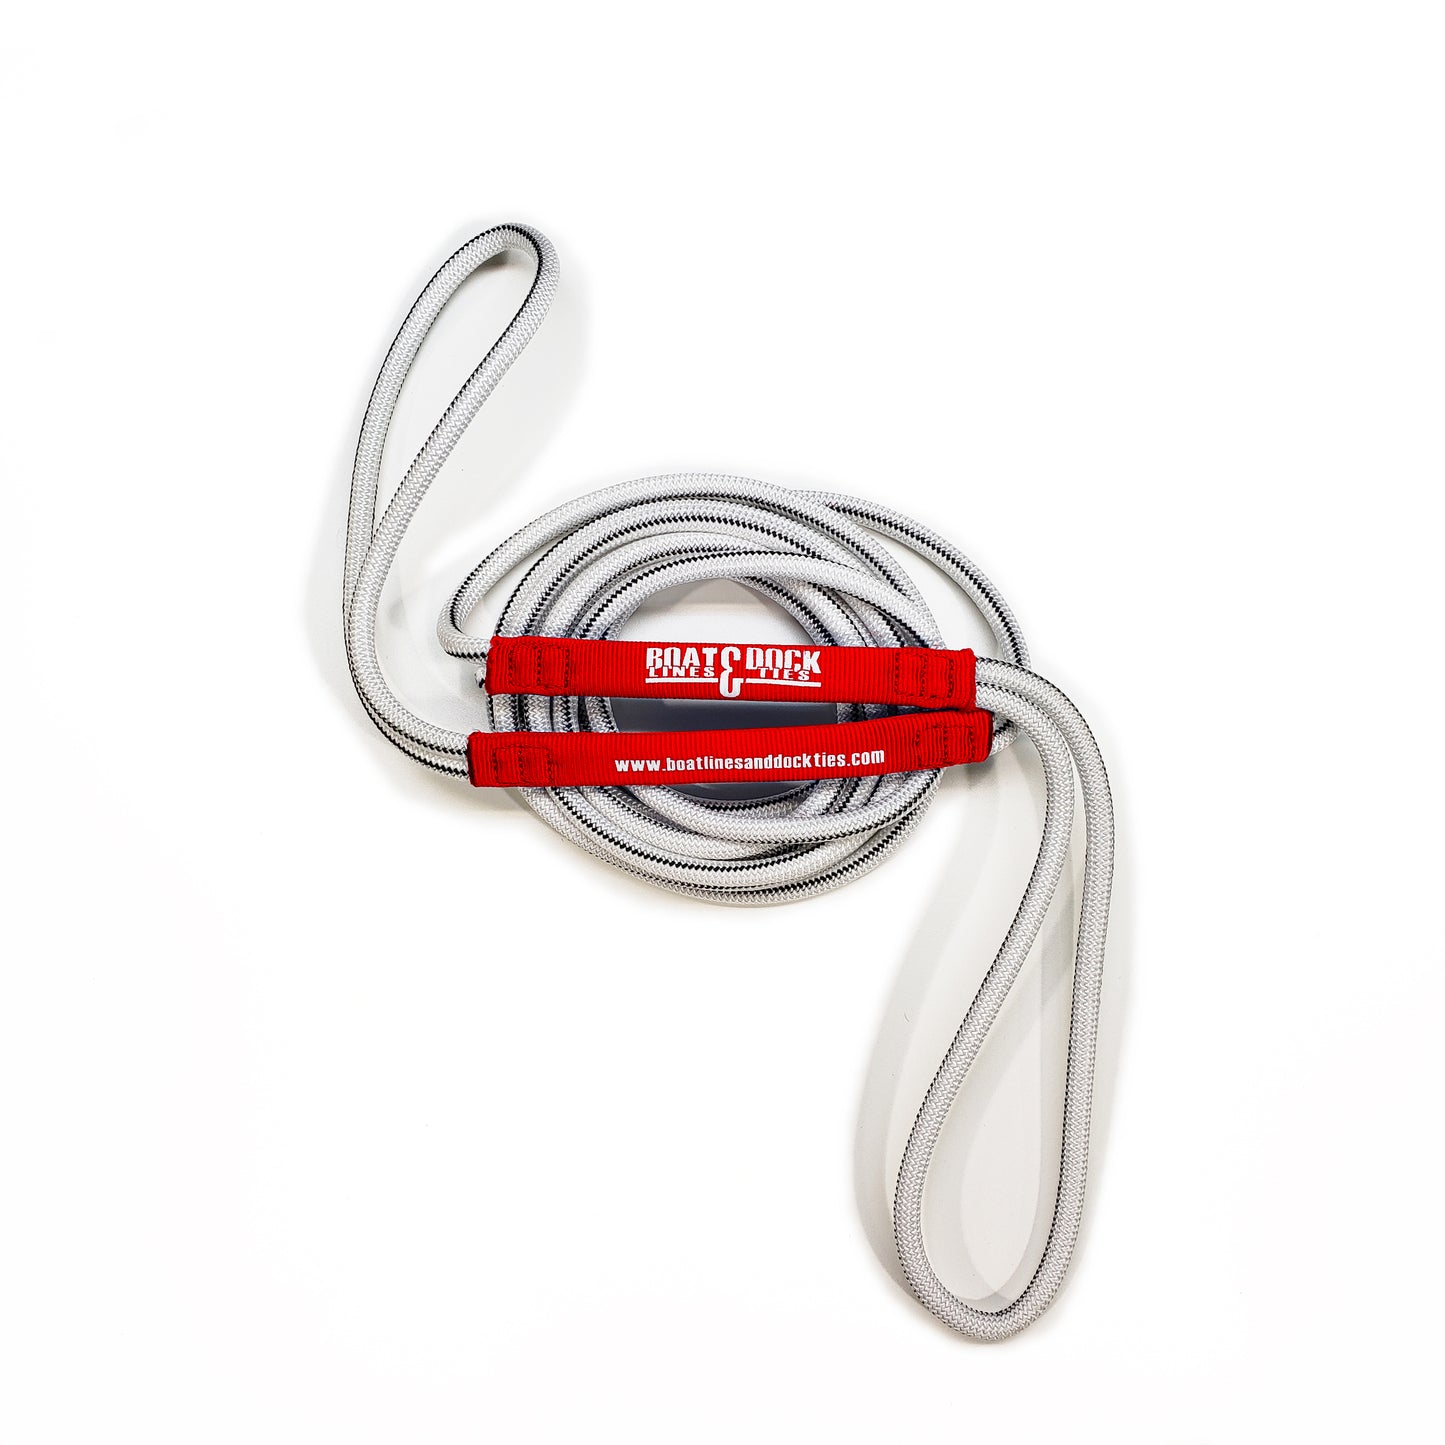 Bungee Boat Rope - Boat Rope Line Bungee Cord, Stretches To Double Relaxed Length, Heavy Duty Boat Line, Used for Launching / Retrieving Boats - USA Made